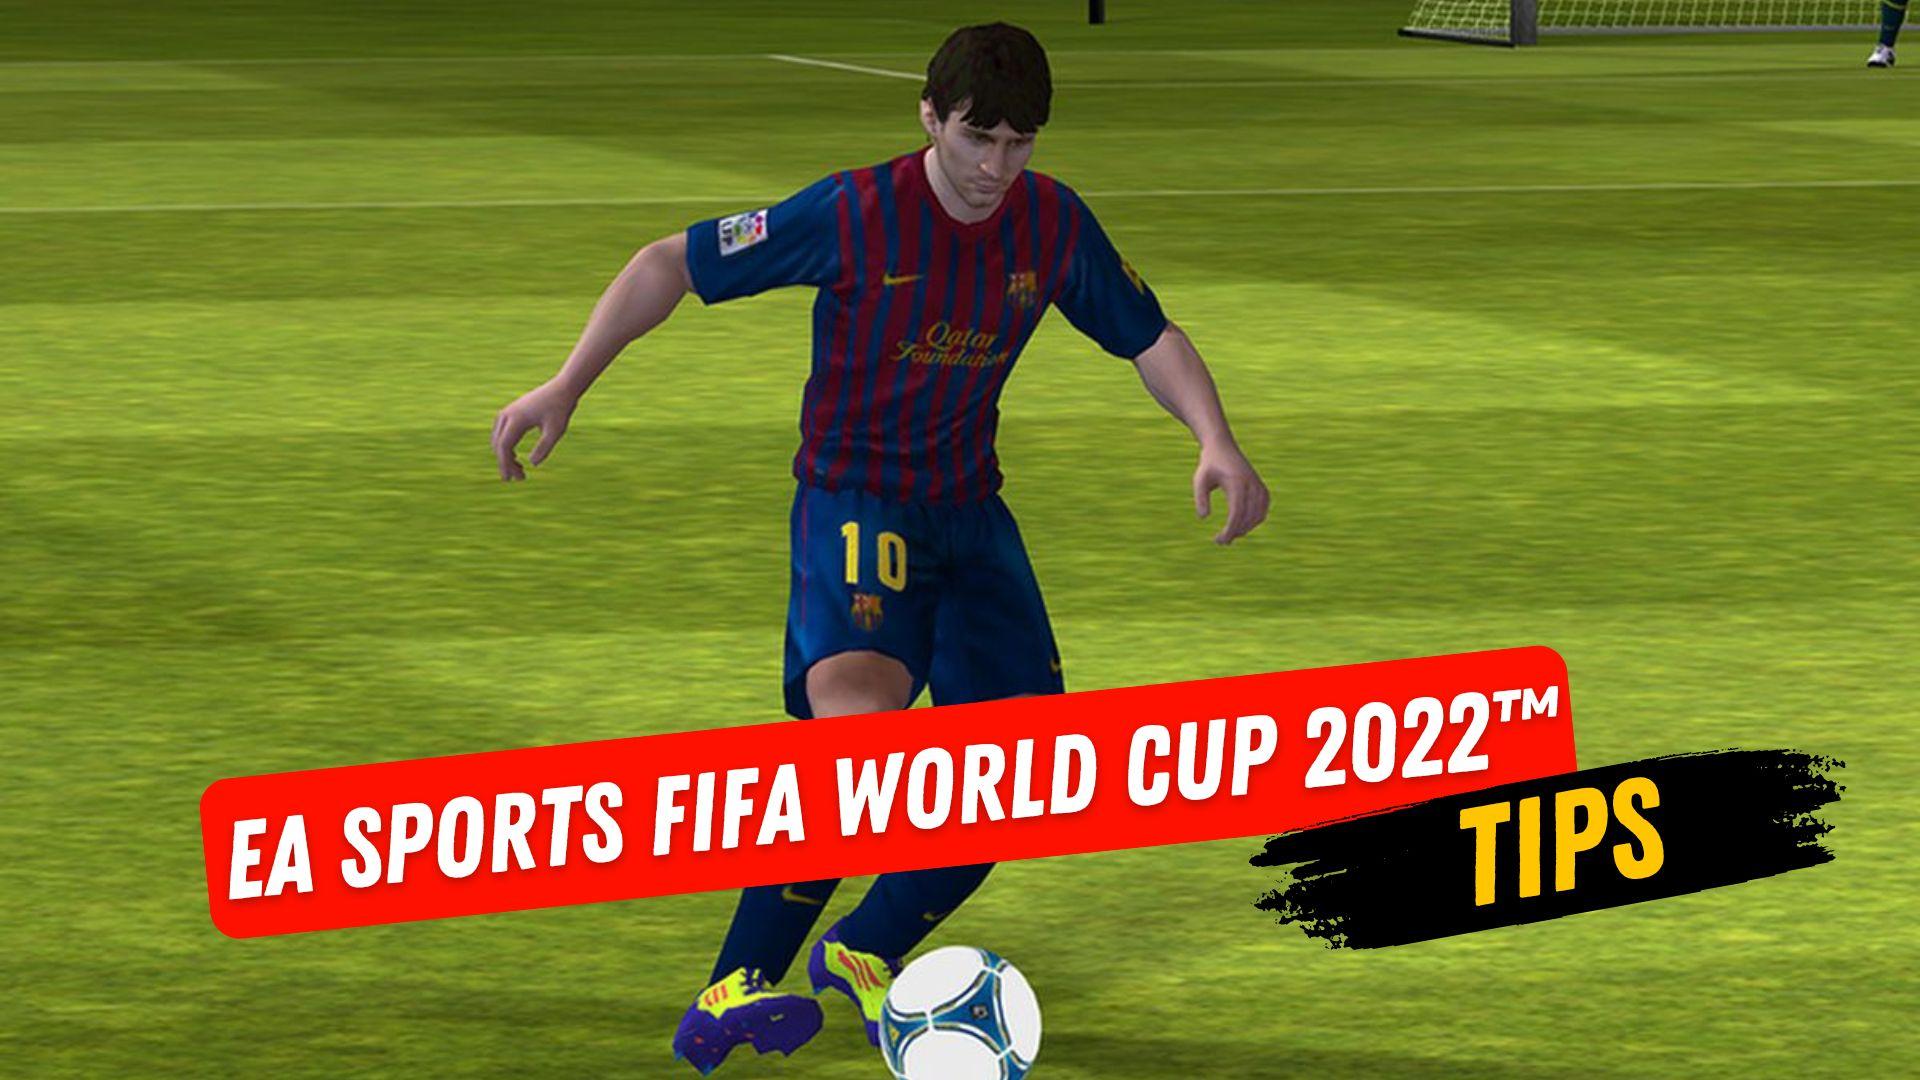 EA SPORTS FC MOBILE 24 SOCCER – Tips and Tricks to Win More